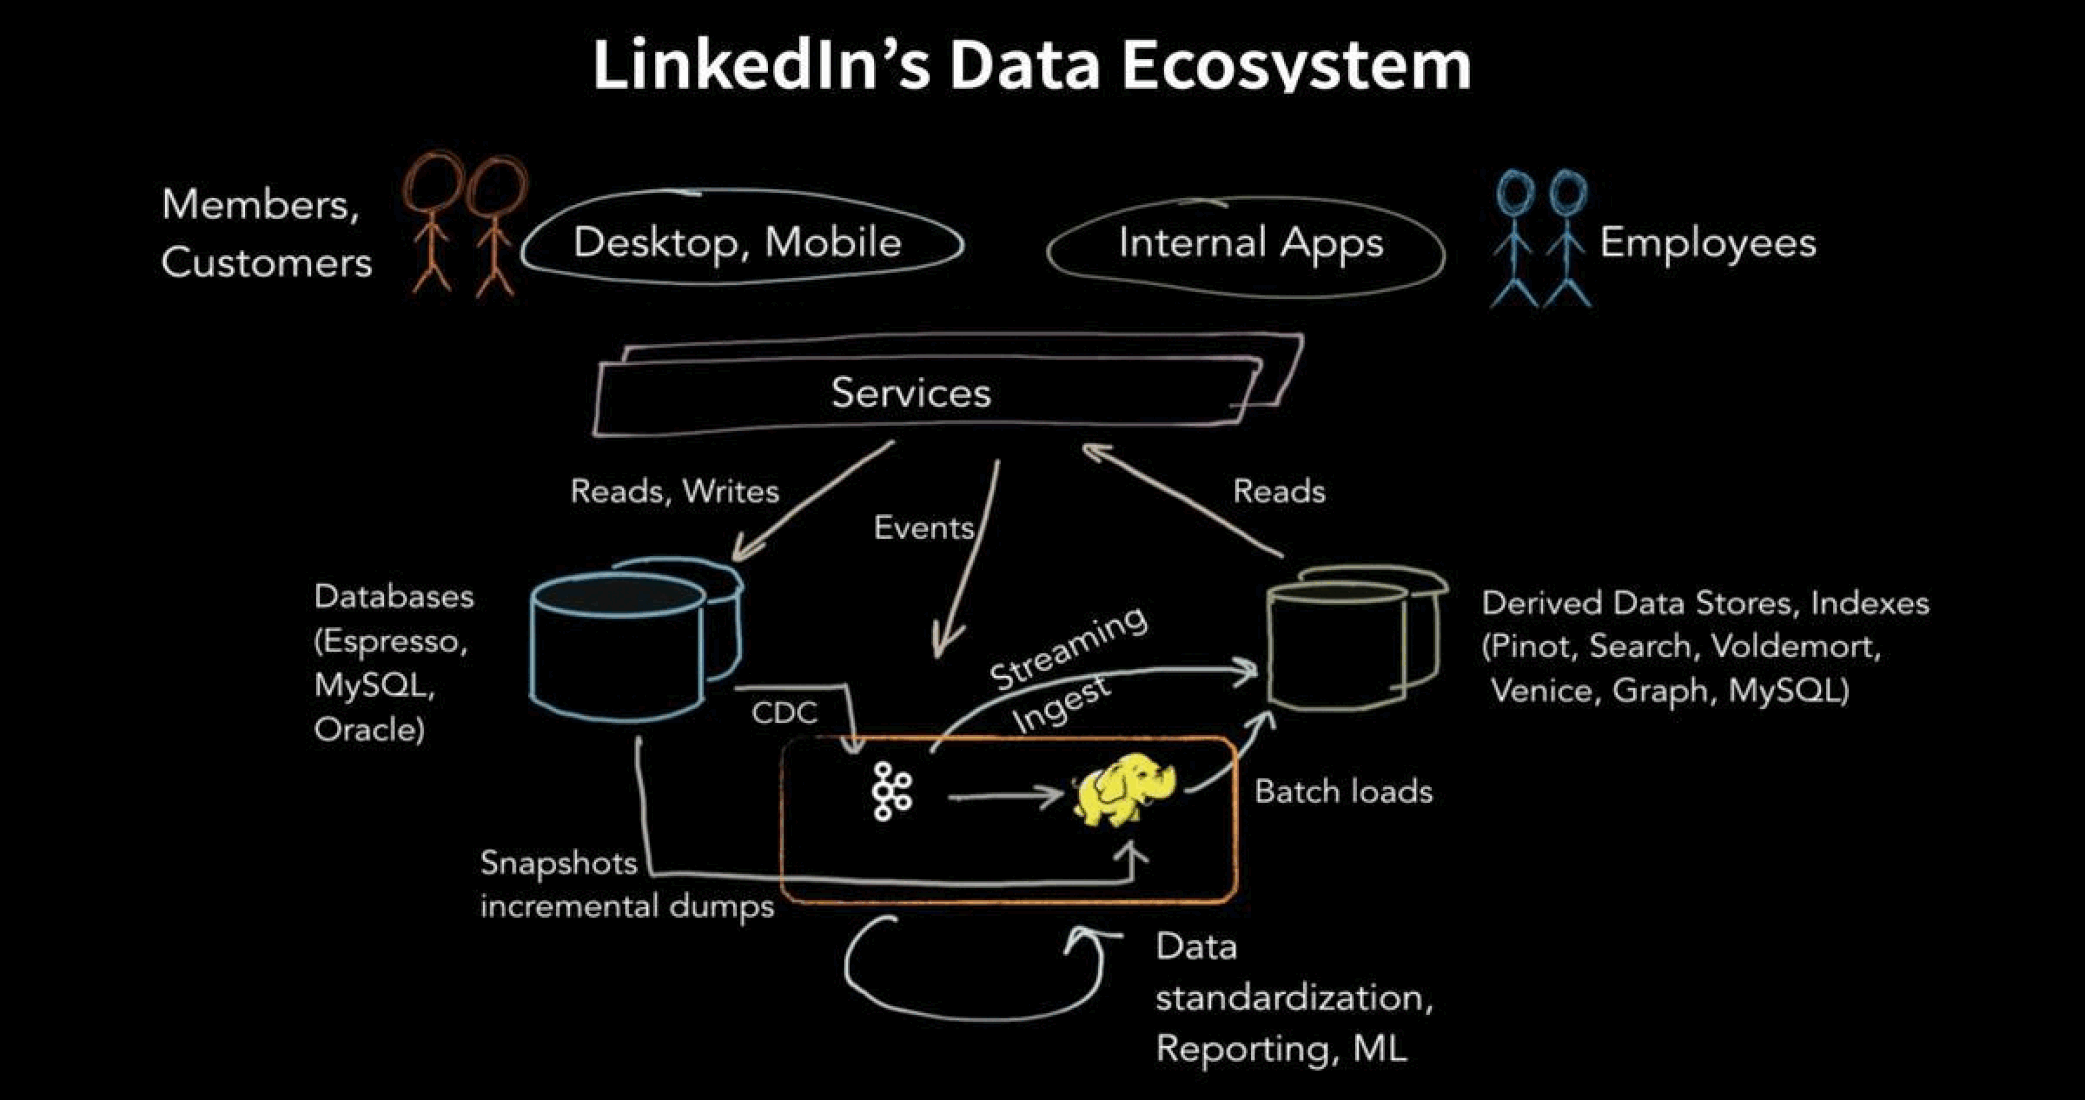 A view of the data-access and deletion layer at LinkedIn